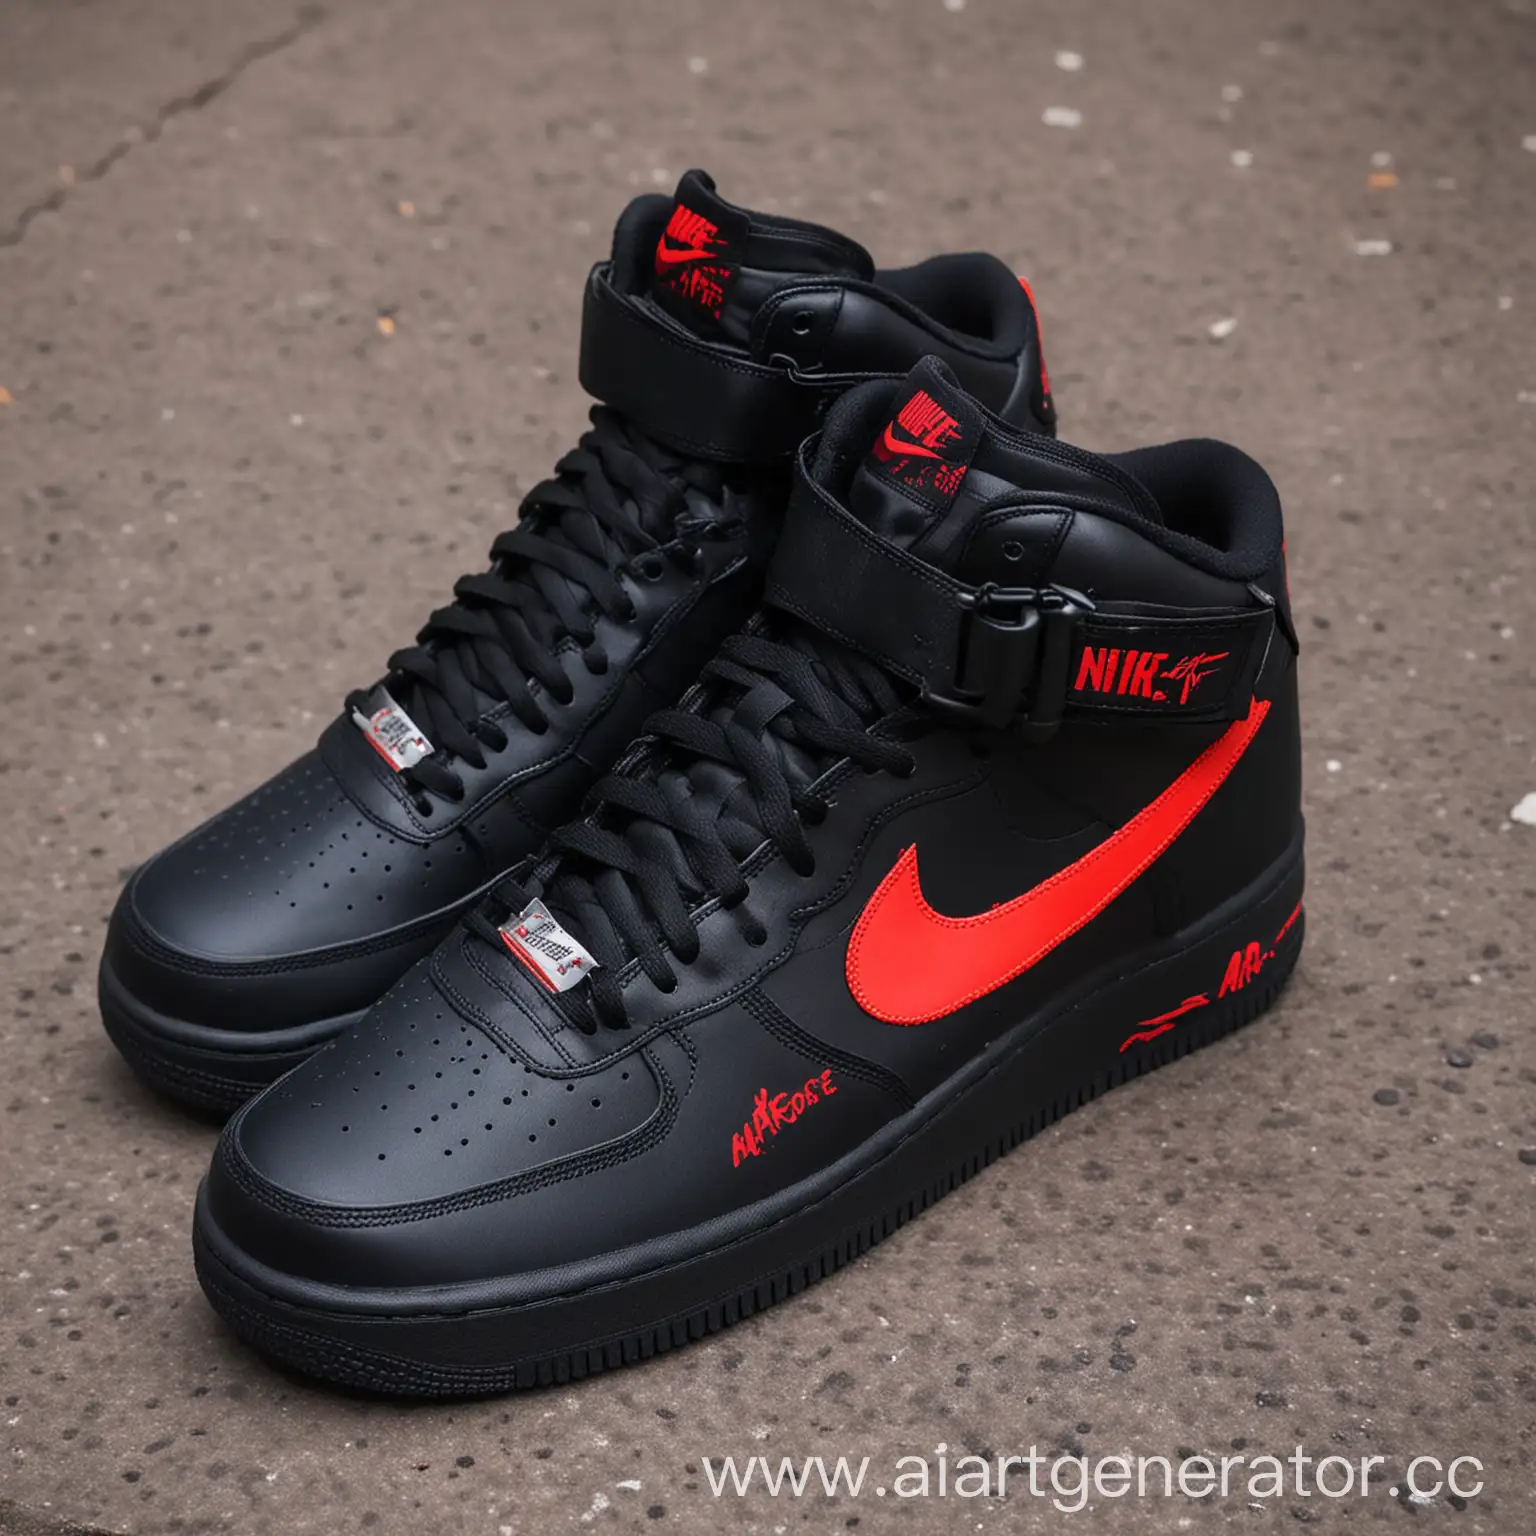 Stylish-Black-Nike-Air-Force-Sneakers-with-Red-Neon-KNYAZ-Inscription